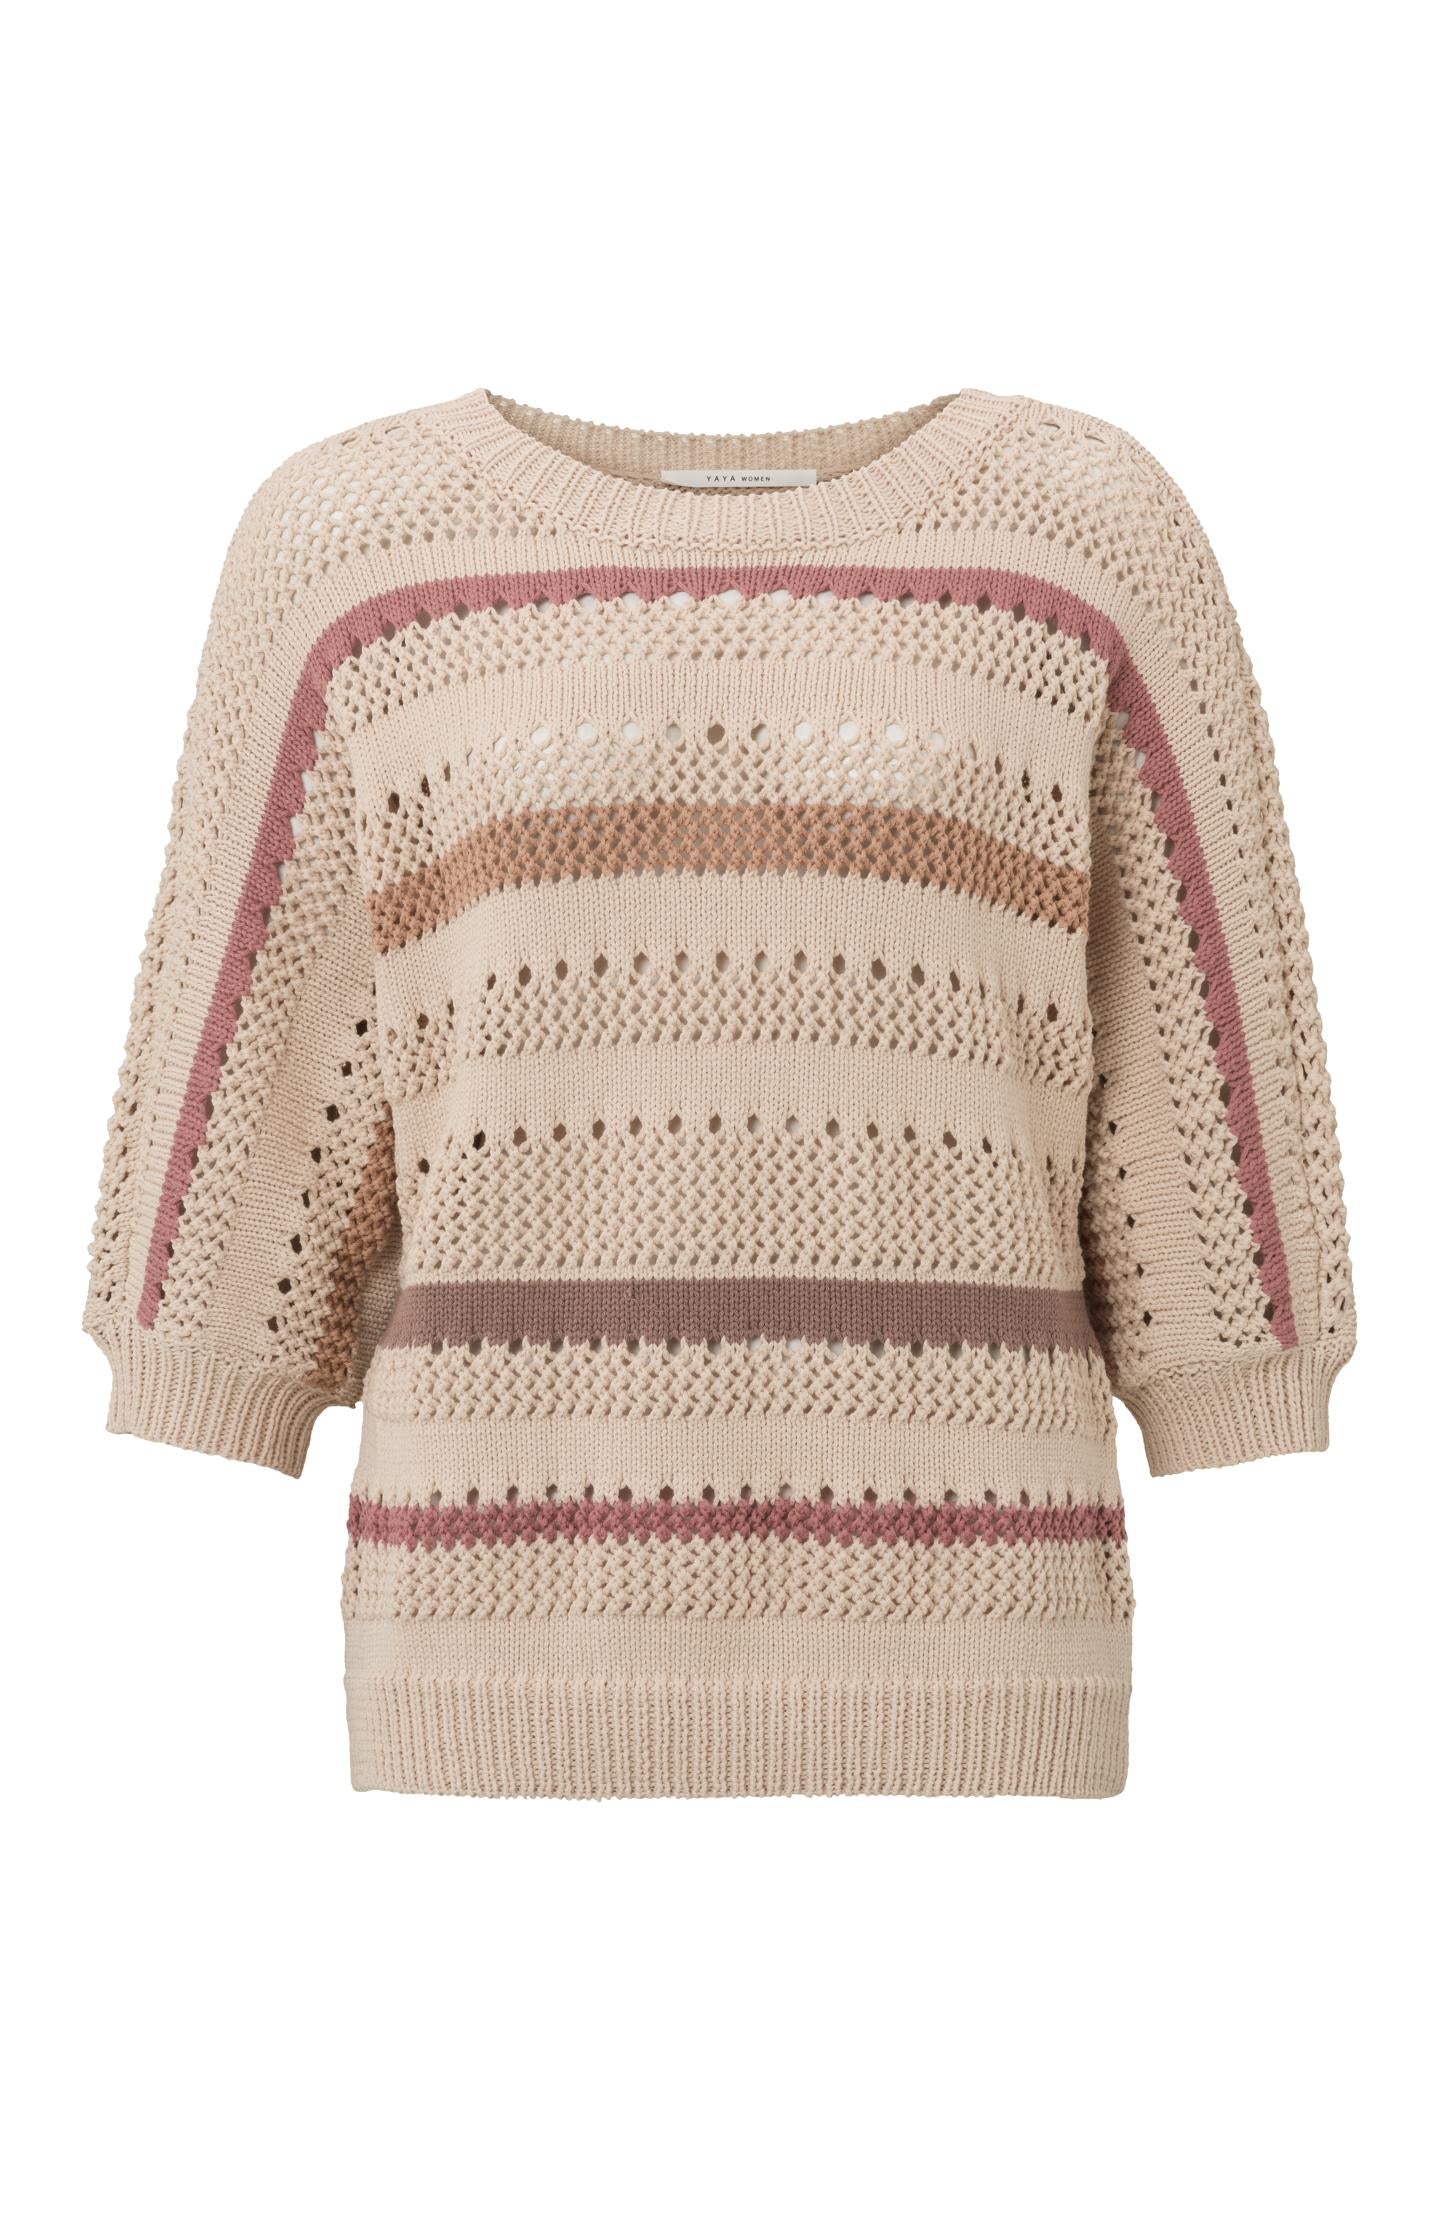 Textured sweater with stripes, round neck and 7/8 sleeves - Type: product